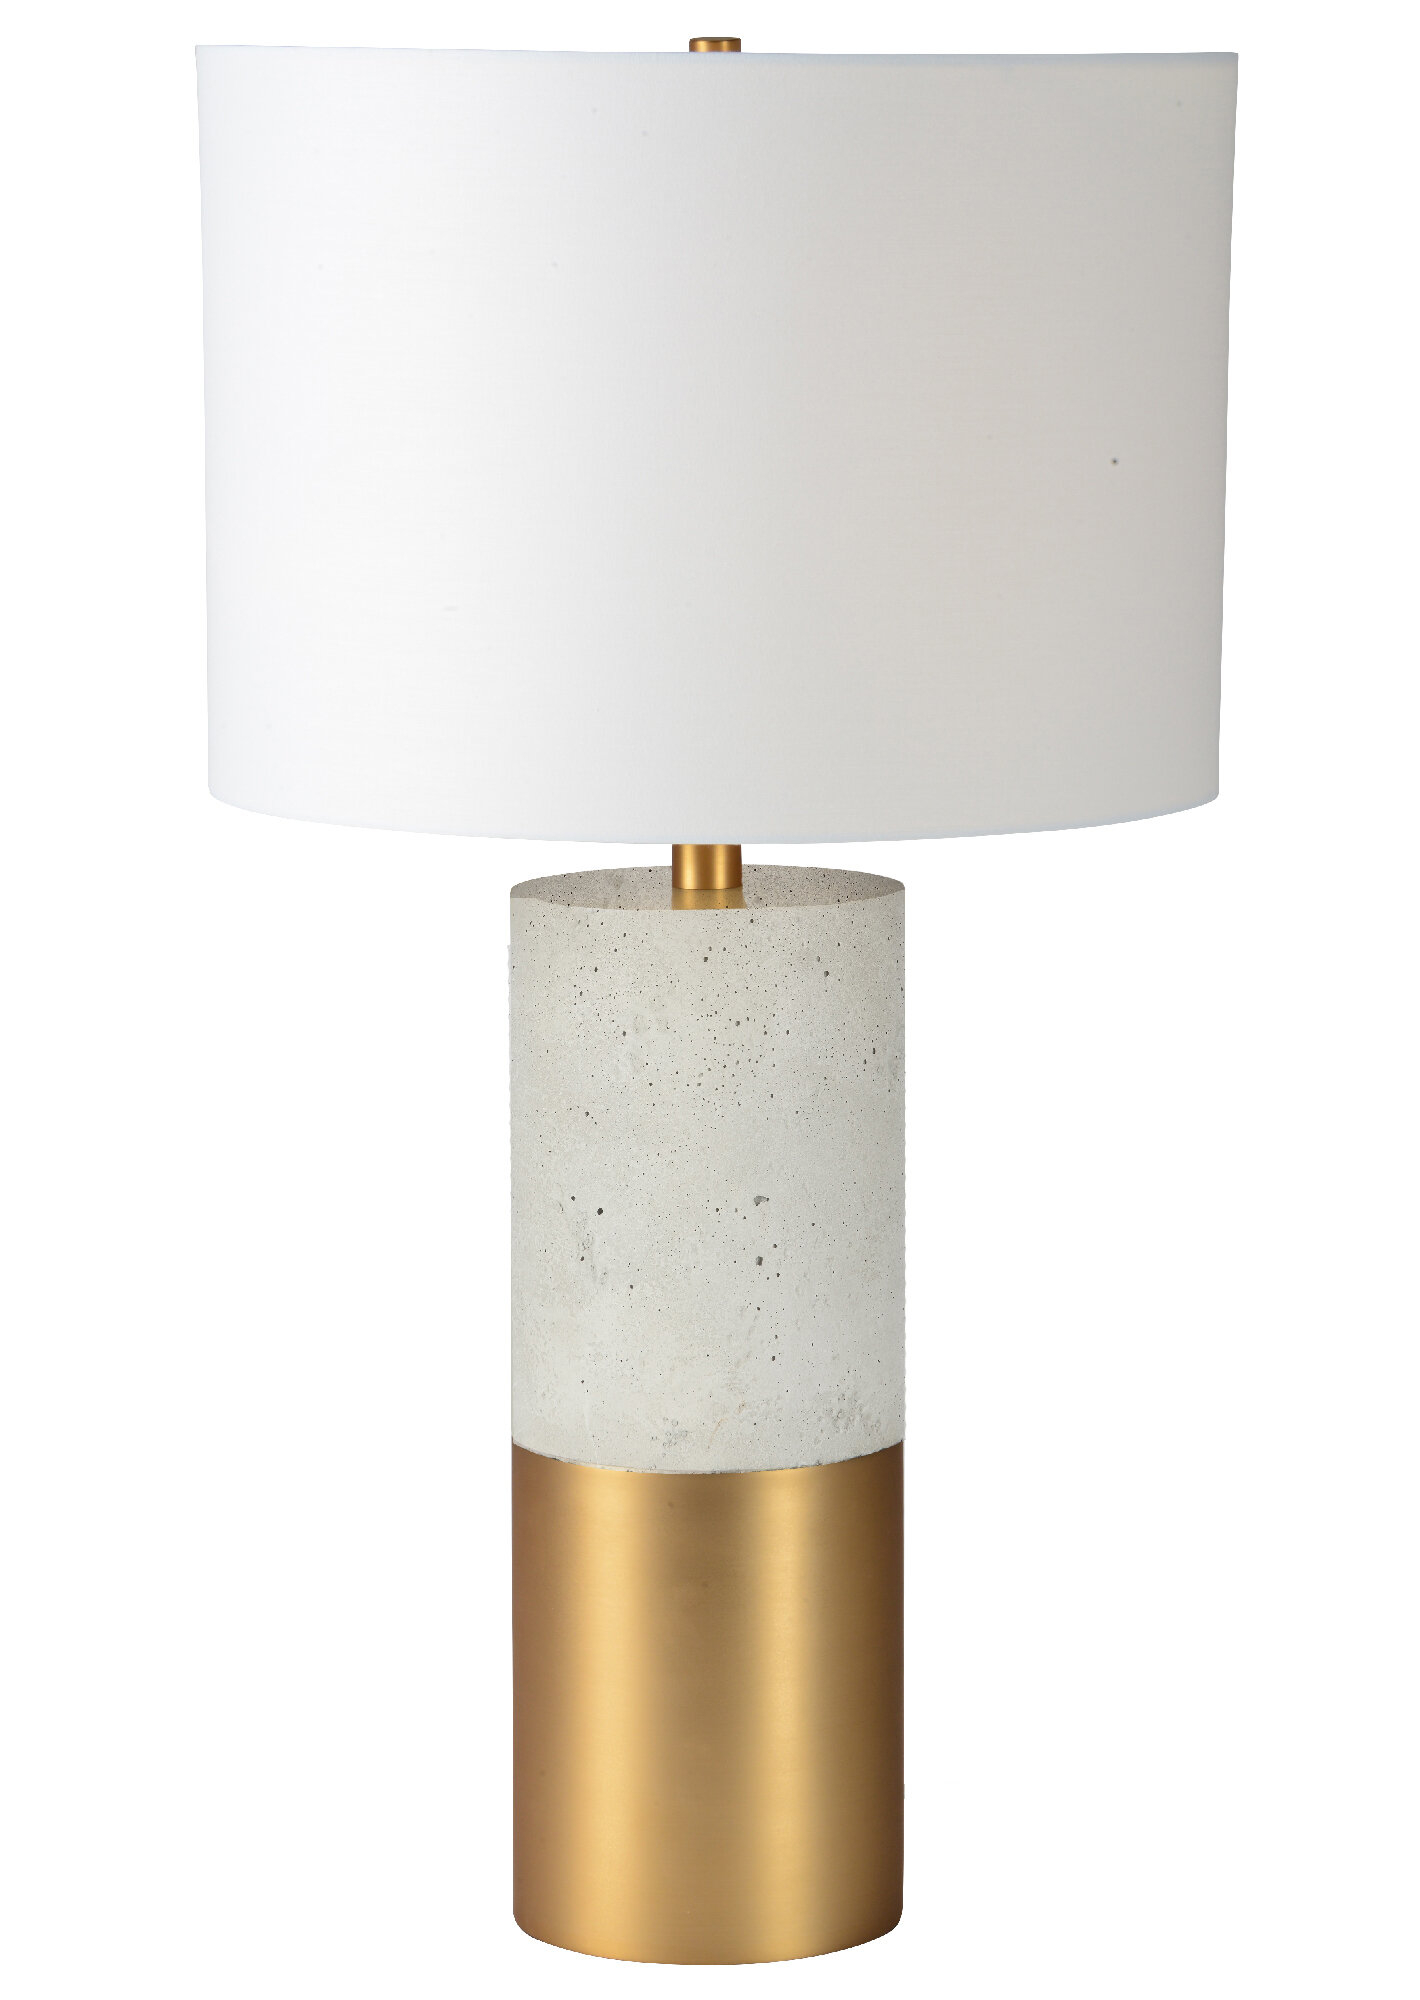 Details About Everly Quinn Wickes 28 Table Lamp throughout dimensions 1420 X 2000